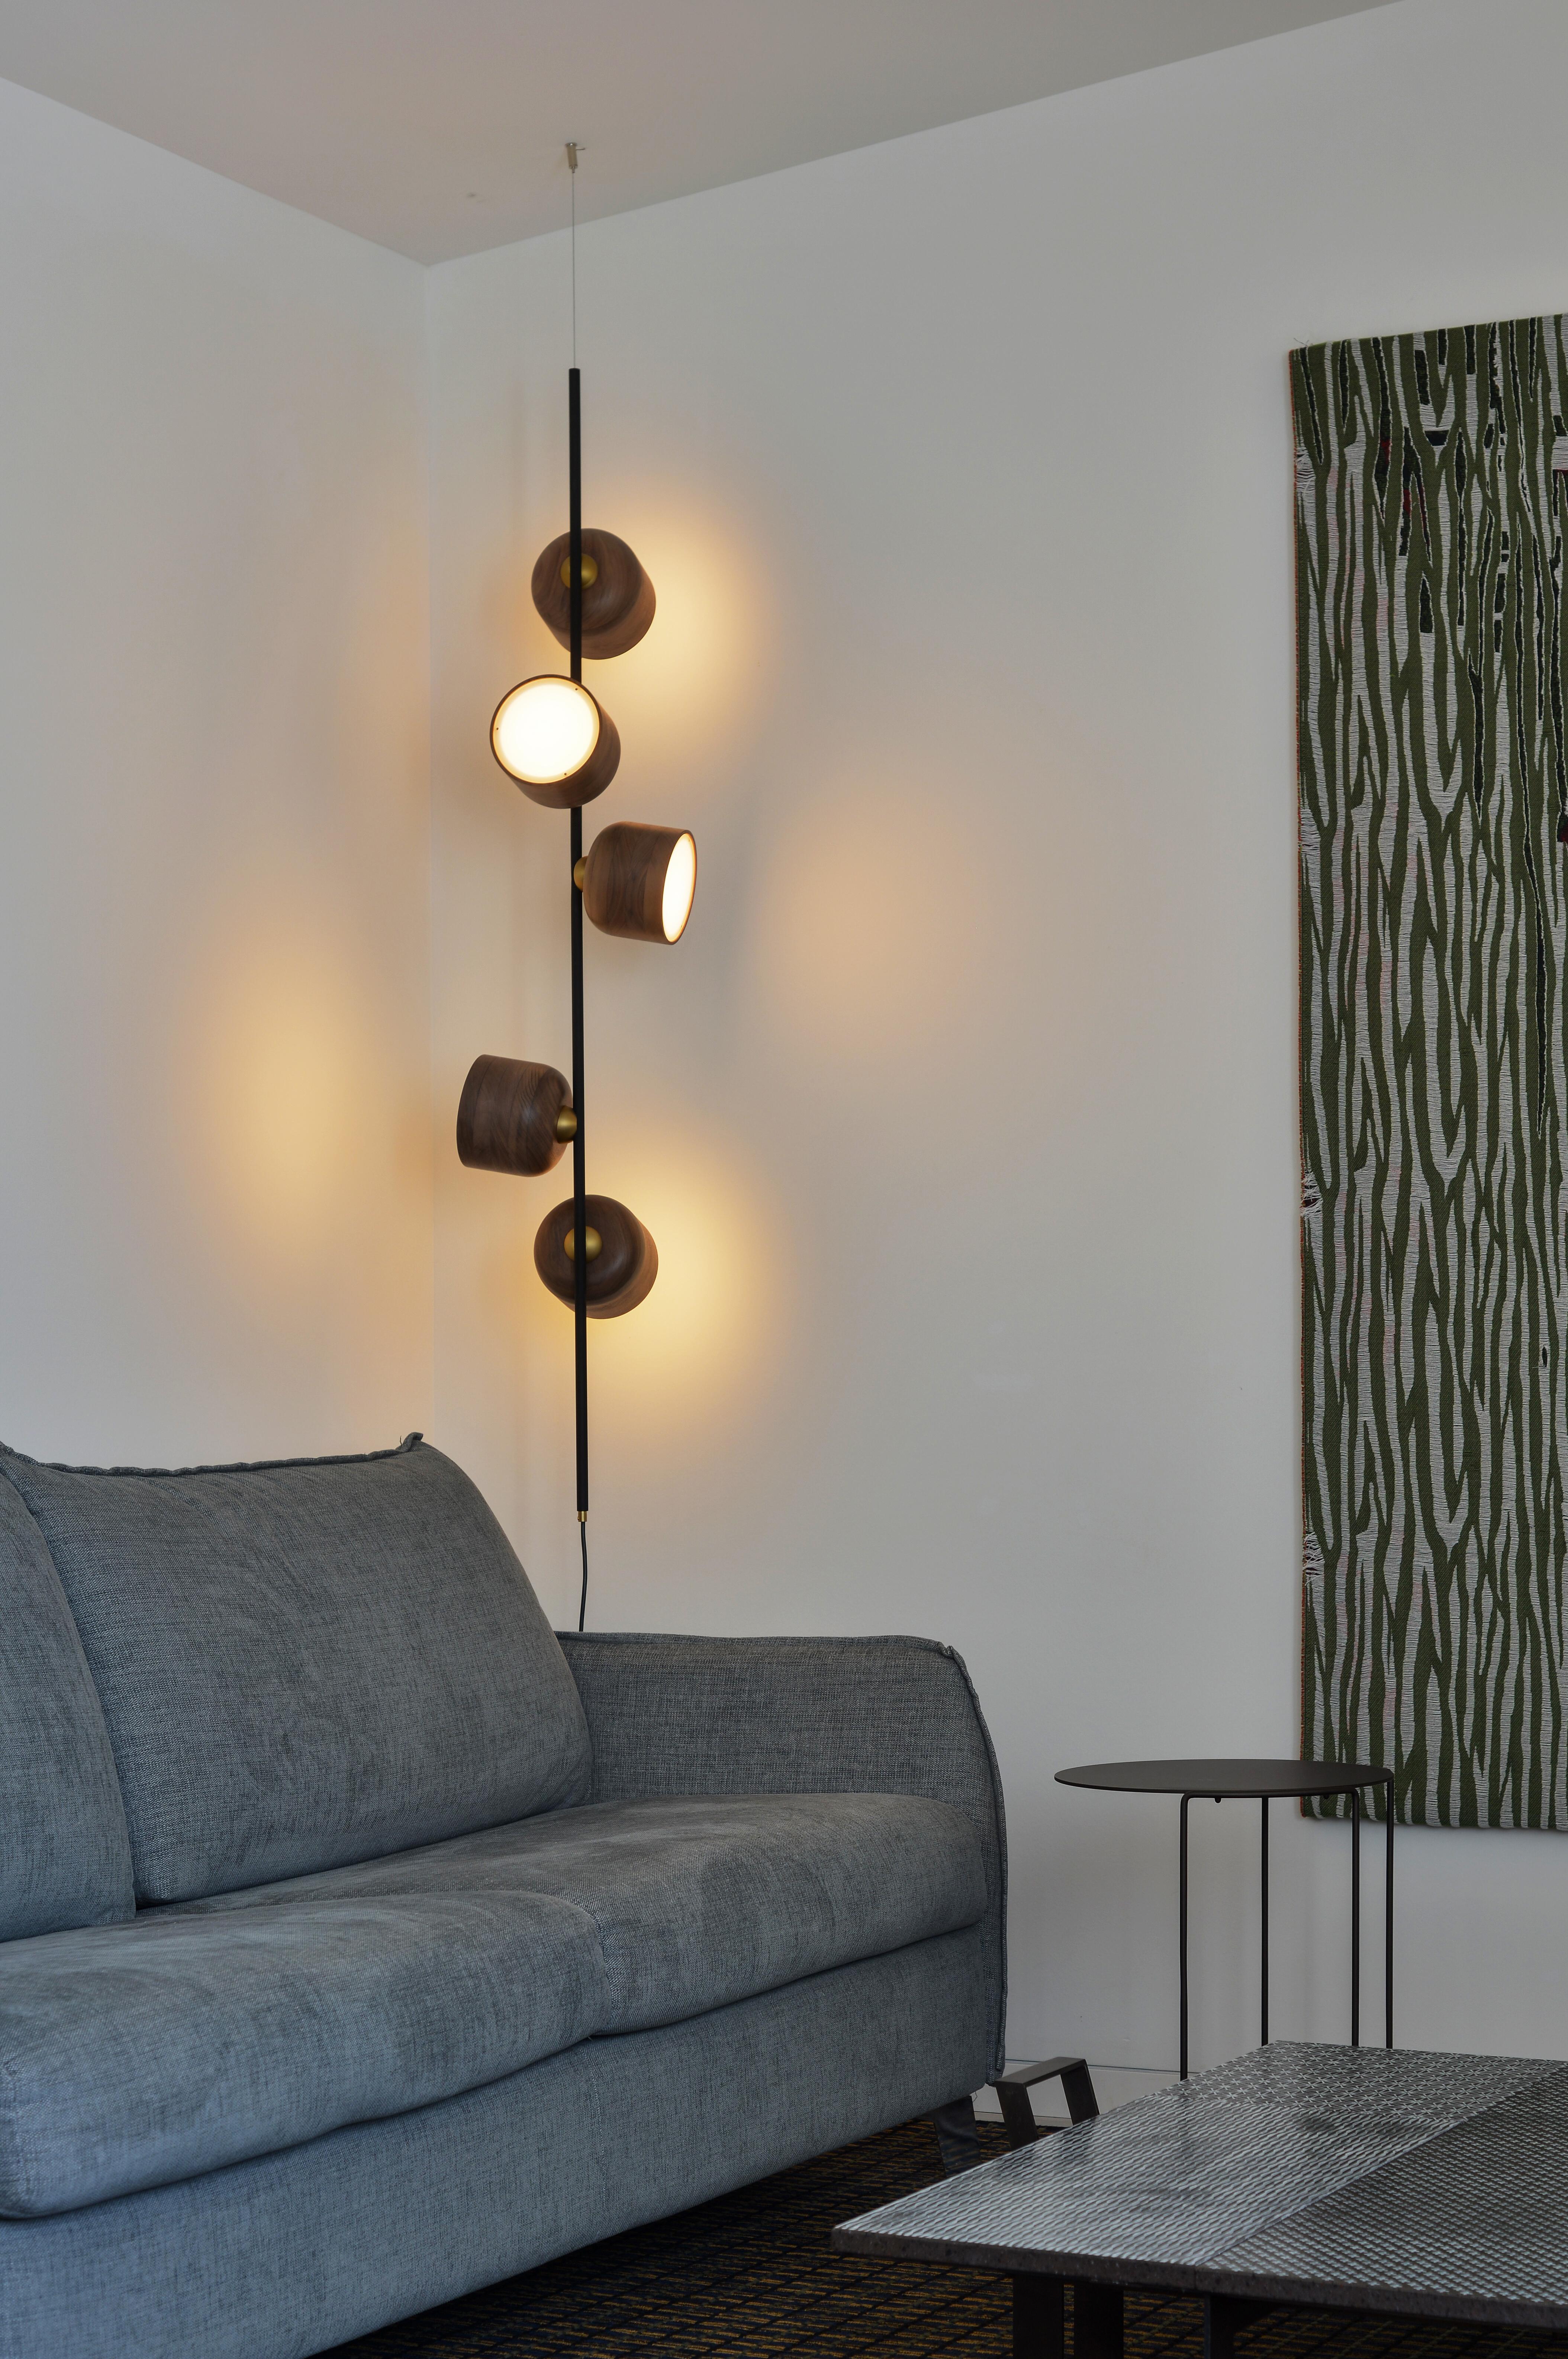 The Berries collection is ideal to create a warm and relaxing atmosphere. 
The shape of the Berries lampshade is defined mainly through interaction with their hosting branch. Each berry is made of wood and shaped in a way that makes it look as